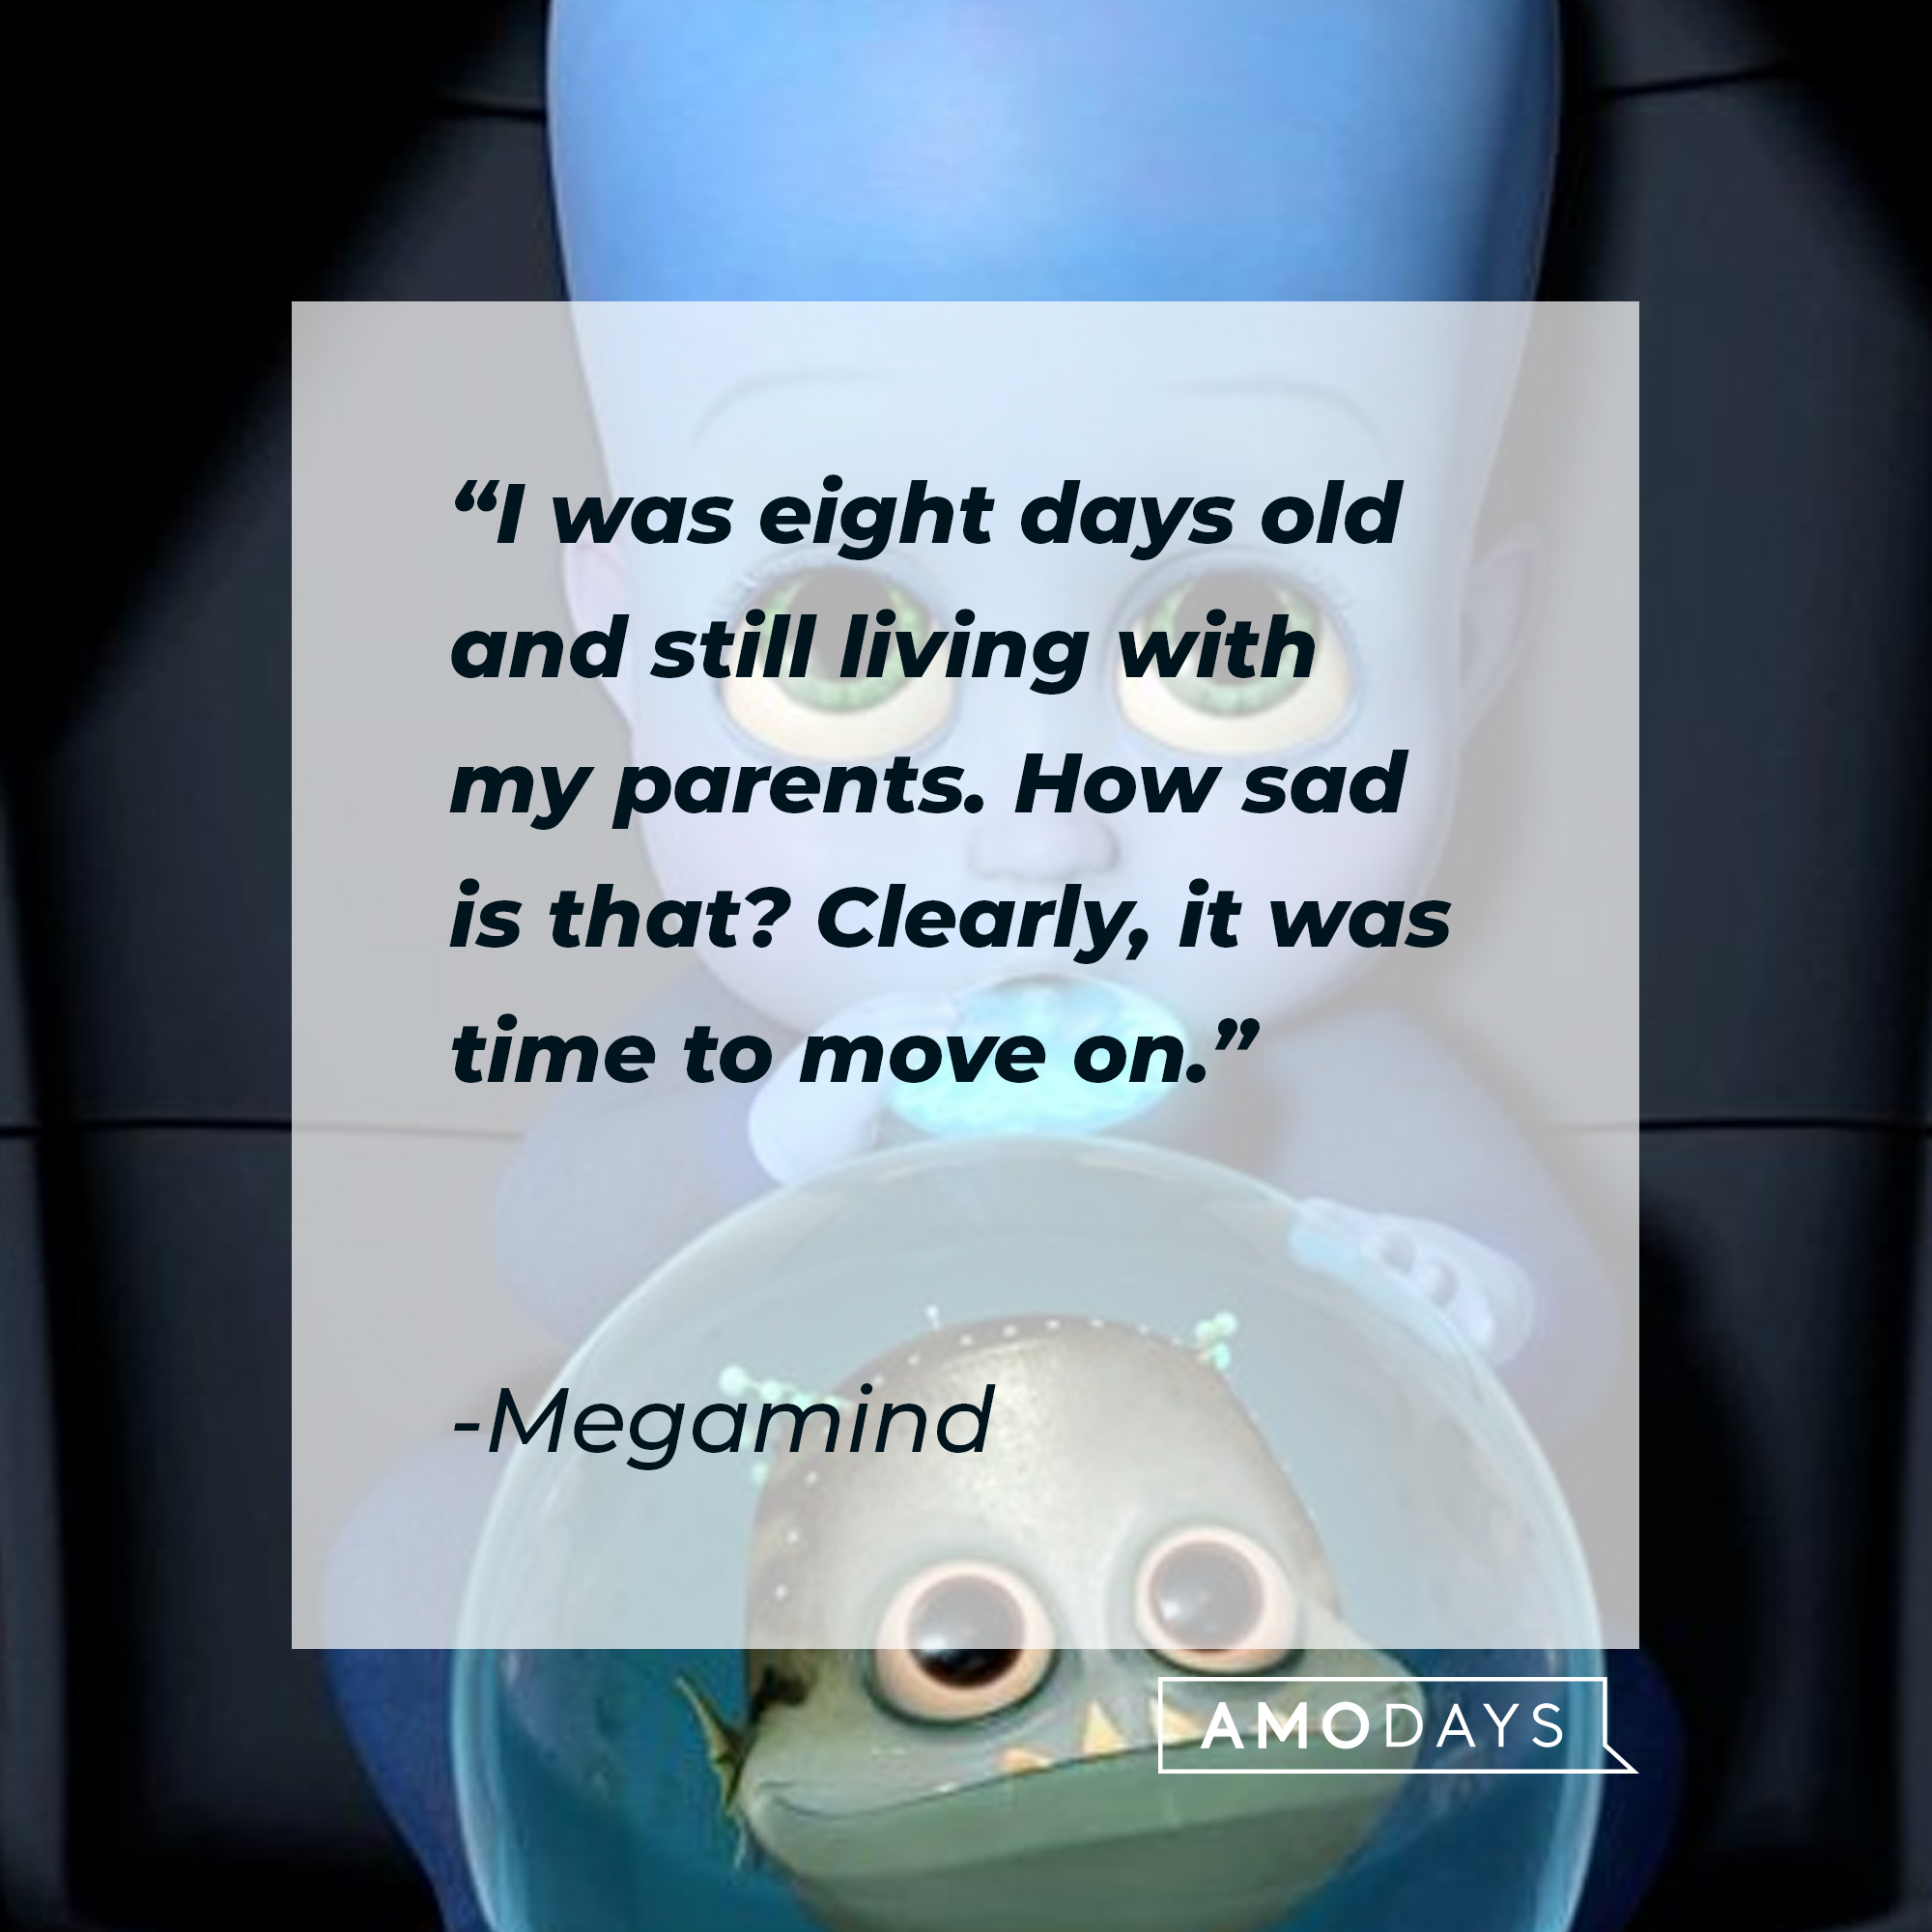 Megamind's quote: "I was eight days old and still living with my parents. How sad is that? Clearly, it was time to move on."| Source: Facebook.com/MegamindUK